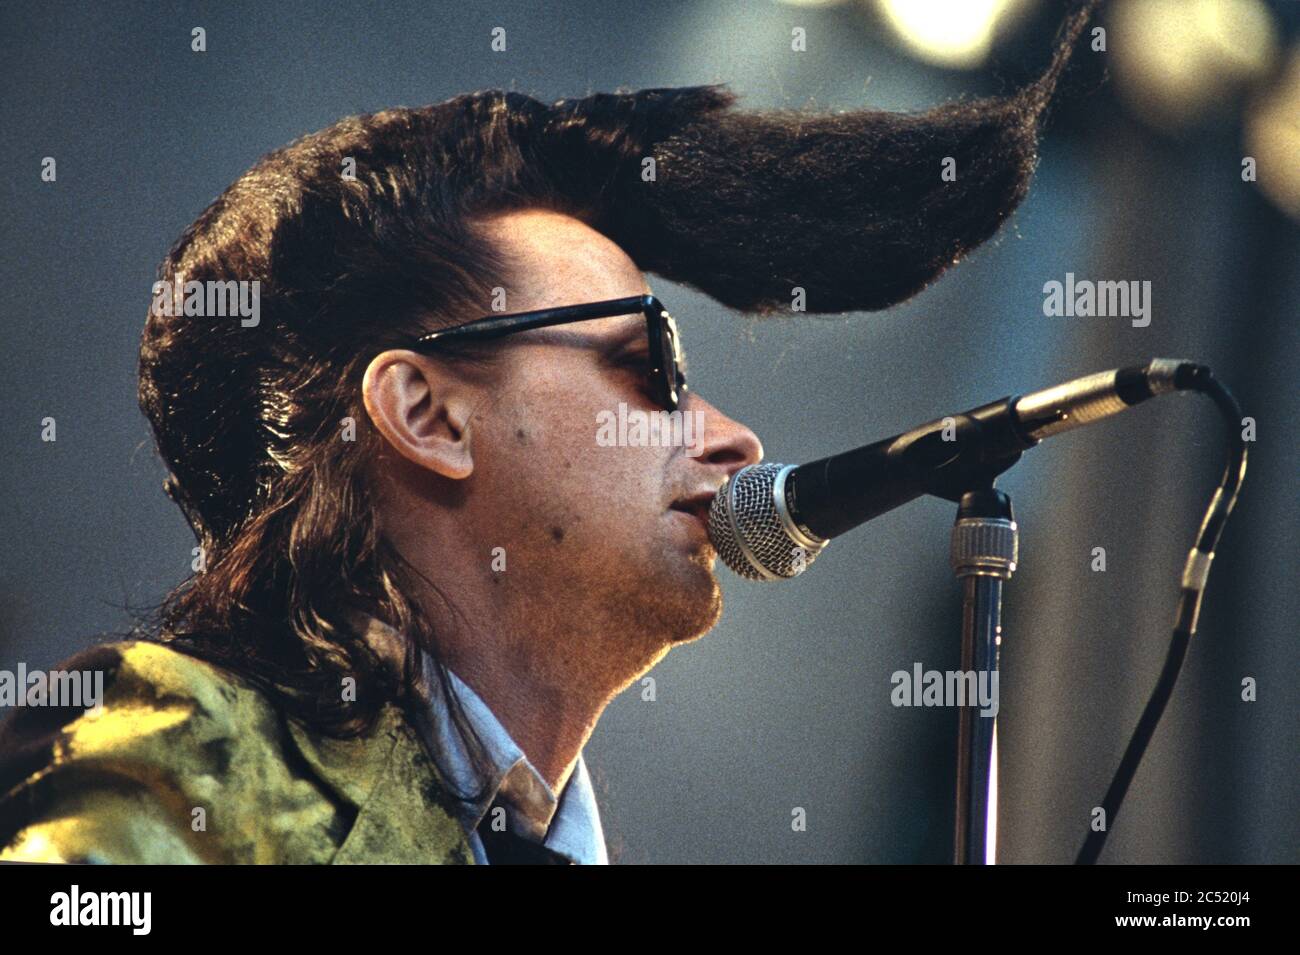 02.07.1993, Kiel, the Leningrad Cowboys on their Live in Prowinzz tour 1993 on the Krusenkoppel open air stage. | usage worldwide Stock Photo